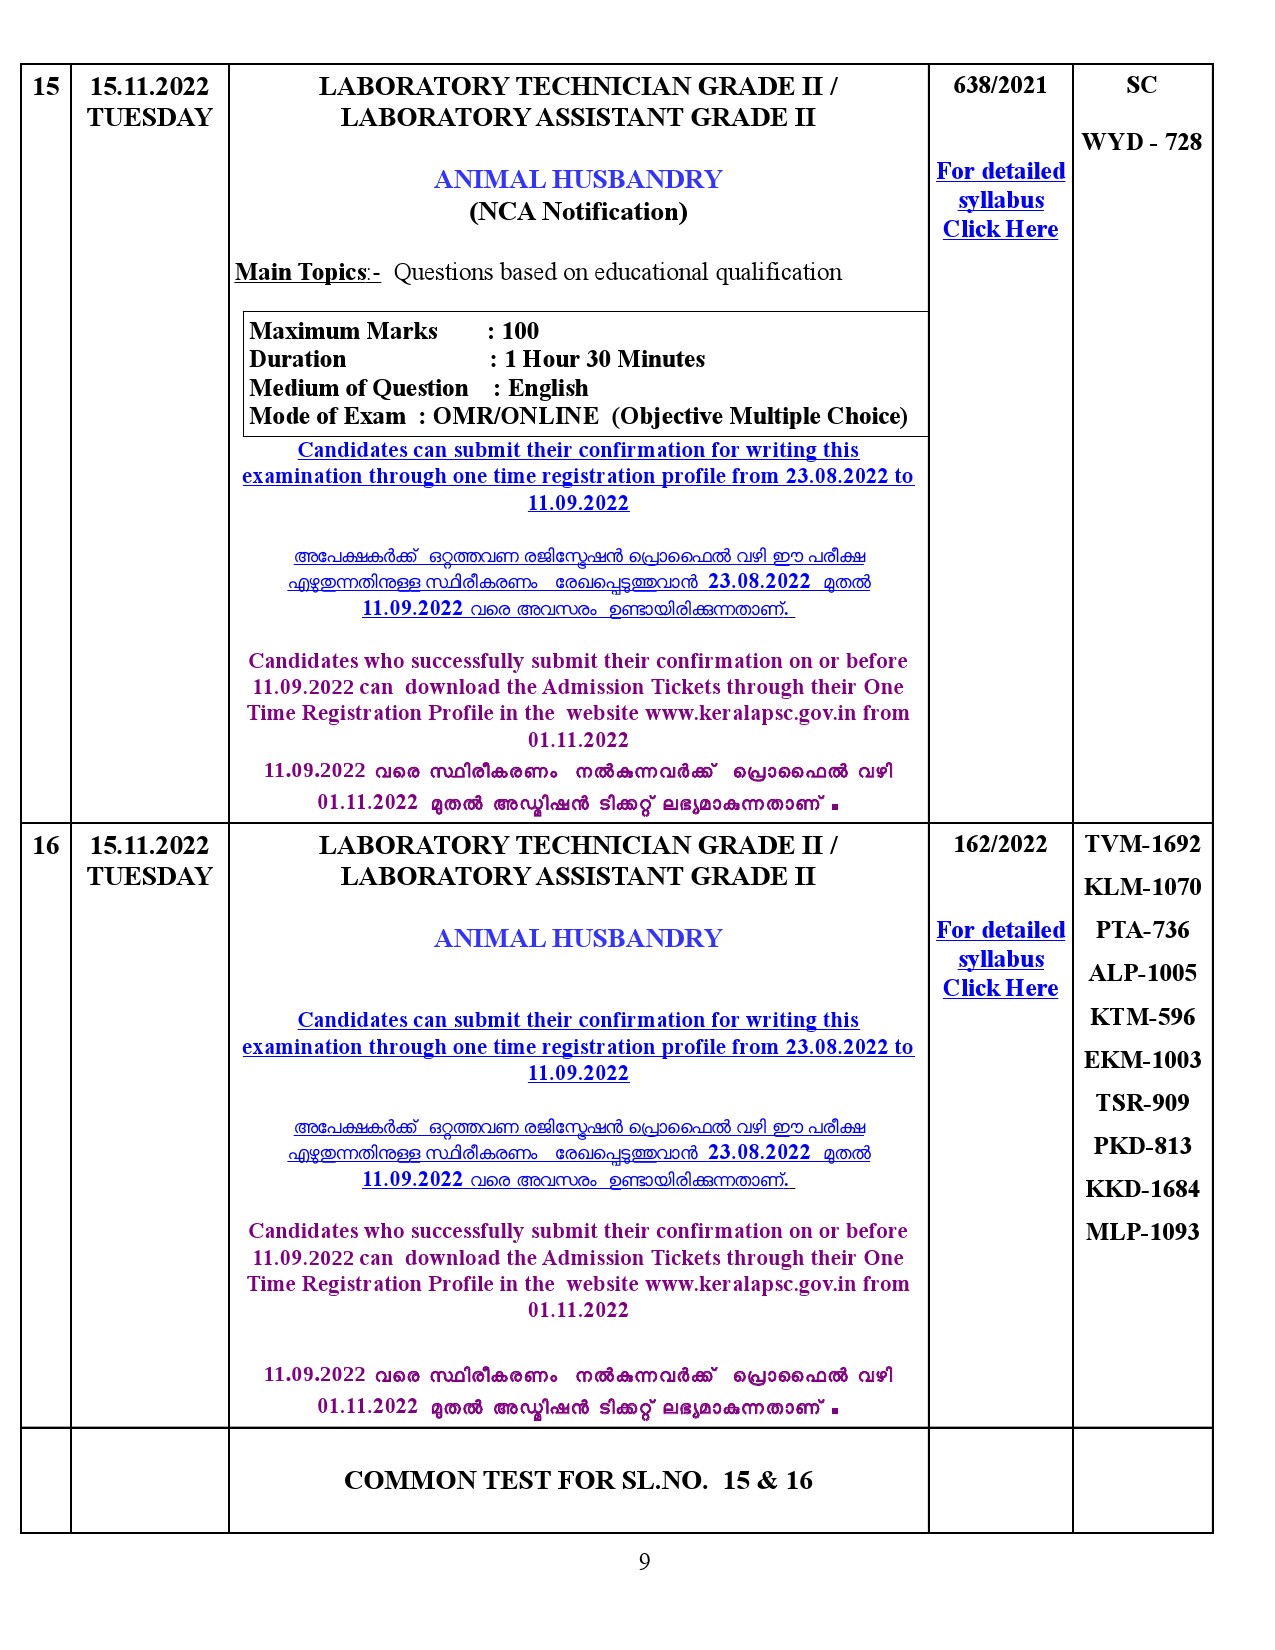 KPSC EXAMINATION PROGRAMME FOR THE MONTH OF NOVEMBER 2022 - Notification Image 9